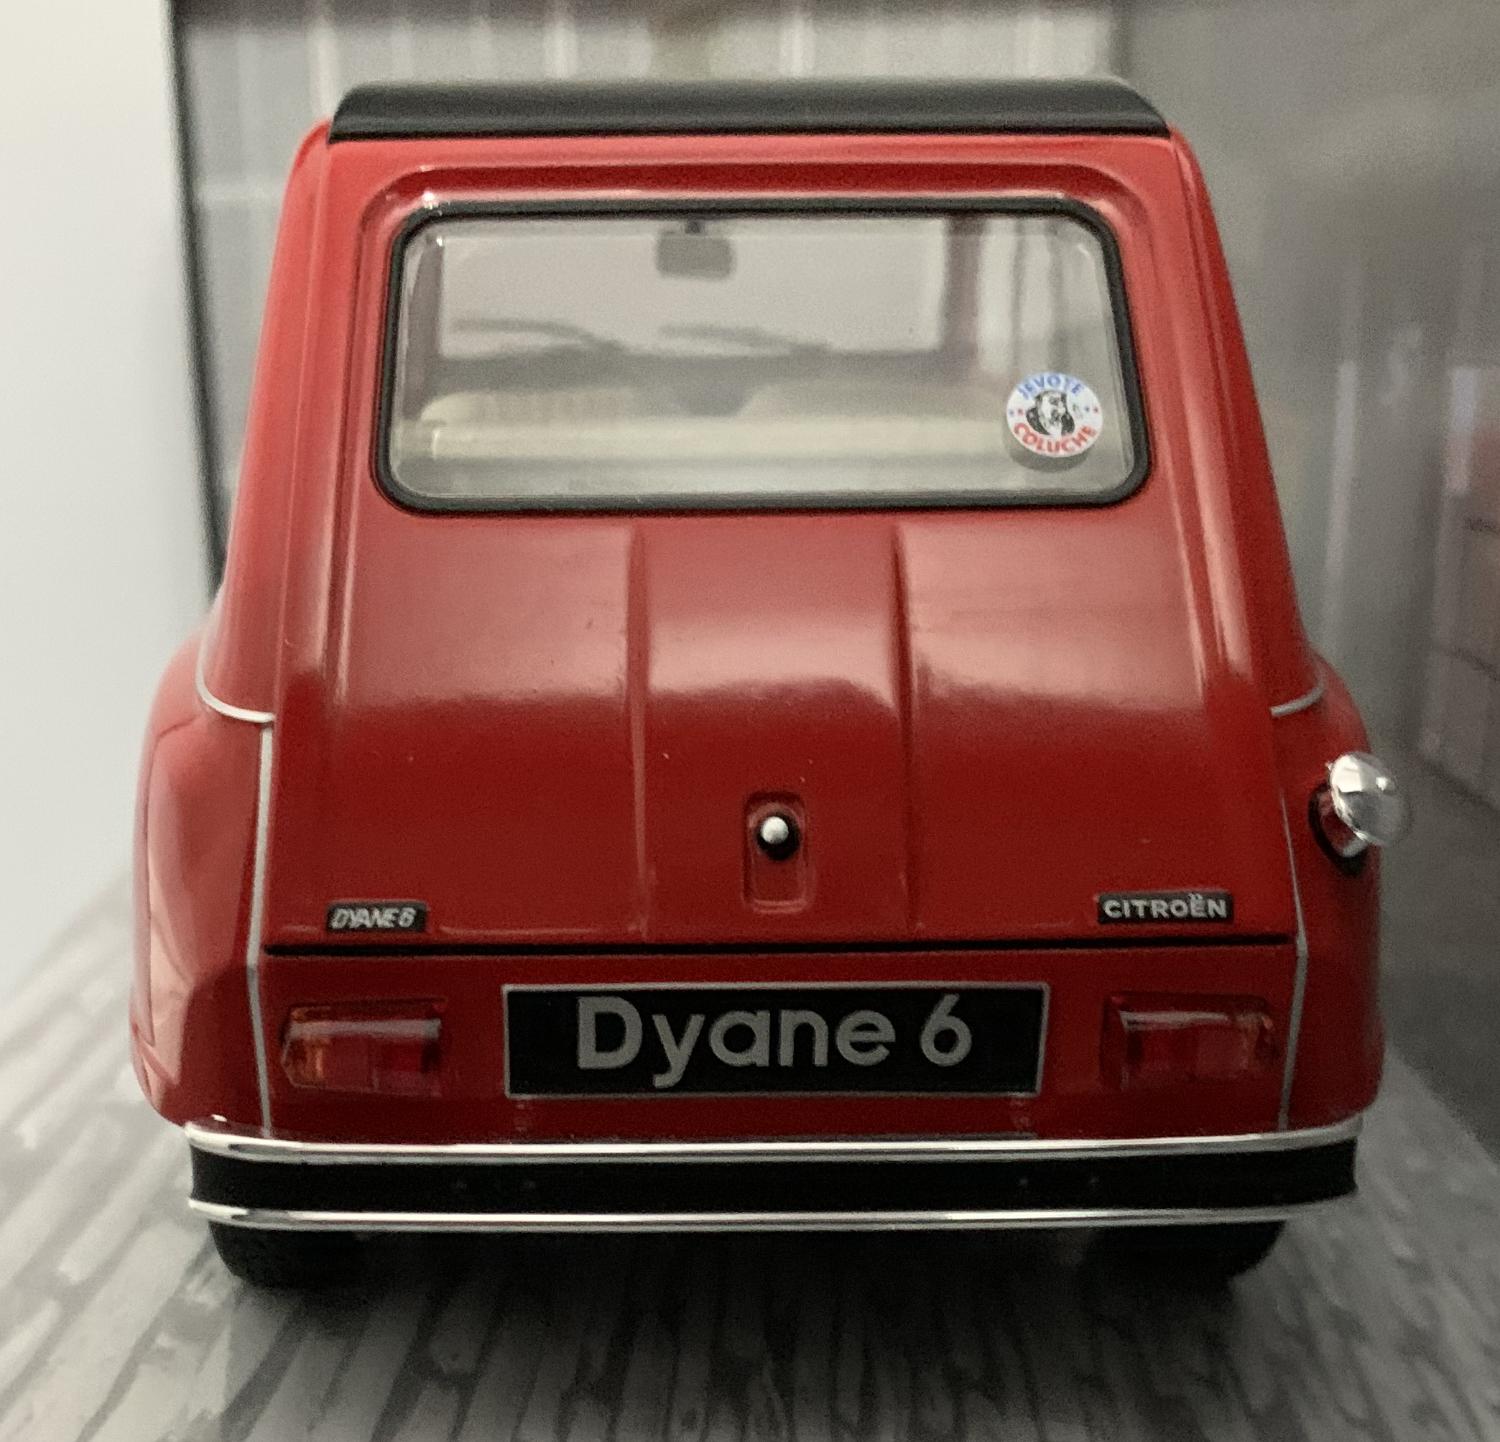 An excellent scale model of the Citroen Dyane 6 with high level of detail throughout, all authentically recreated.  Model is presented in a window display box.    The car is approx. 21 cm long and the presentation box is 31 cm long